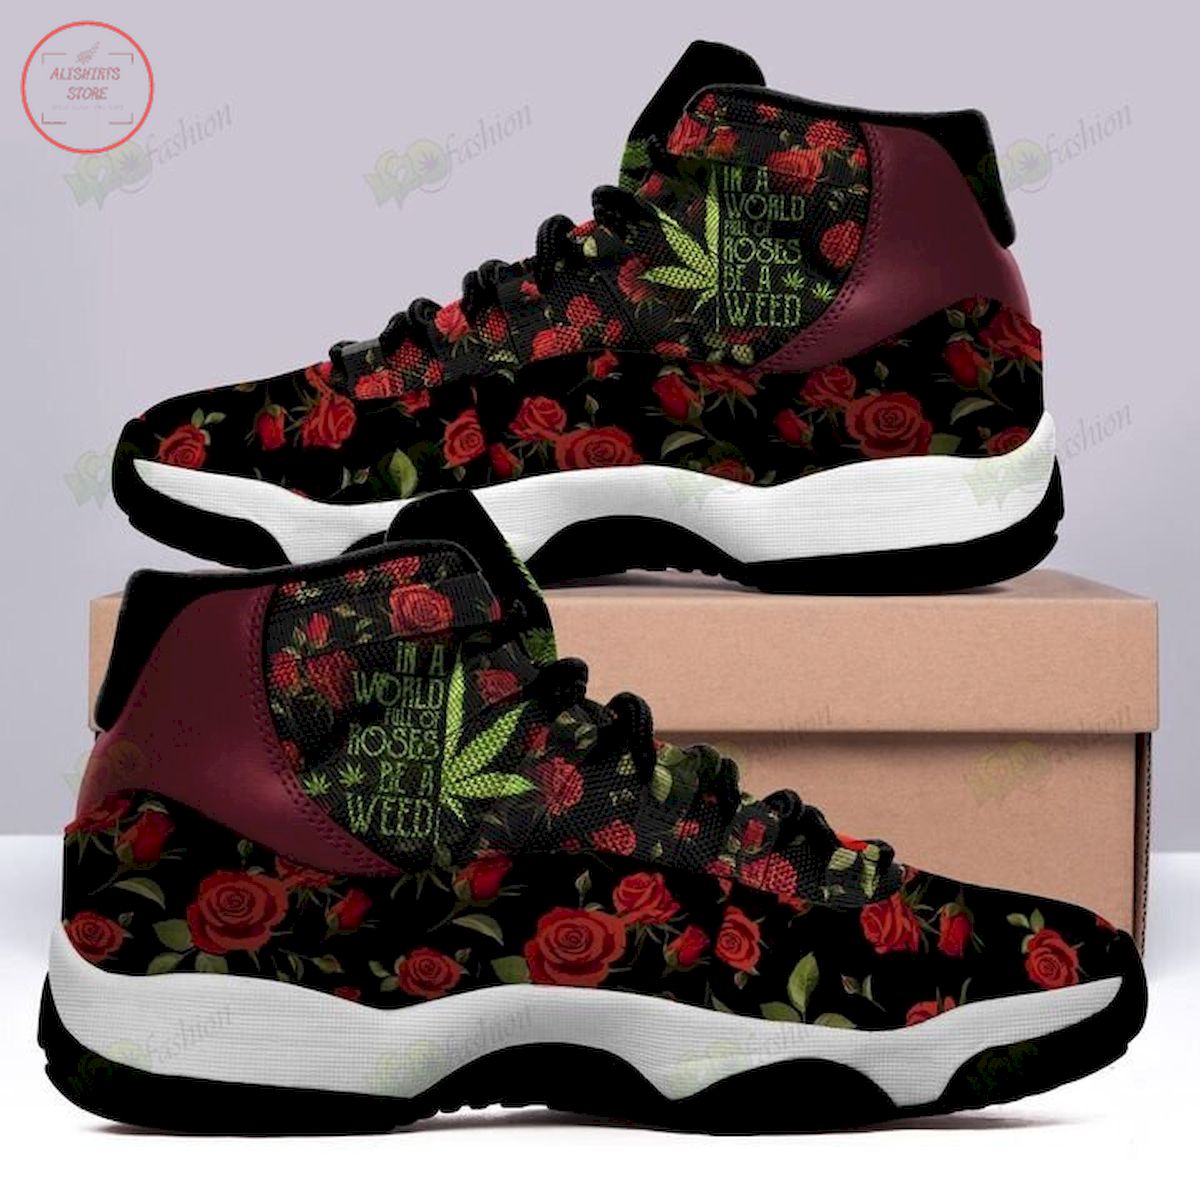 In a World Full of Roses Be a Weed Air Jordan 11 Sneaker Shoes